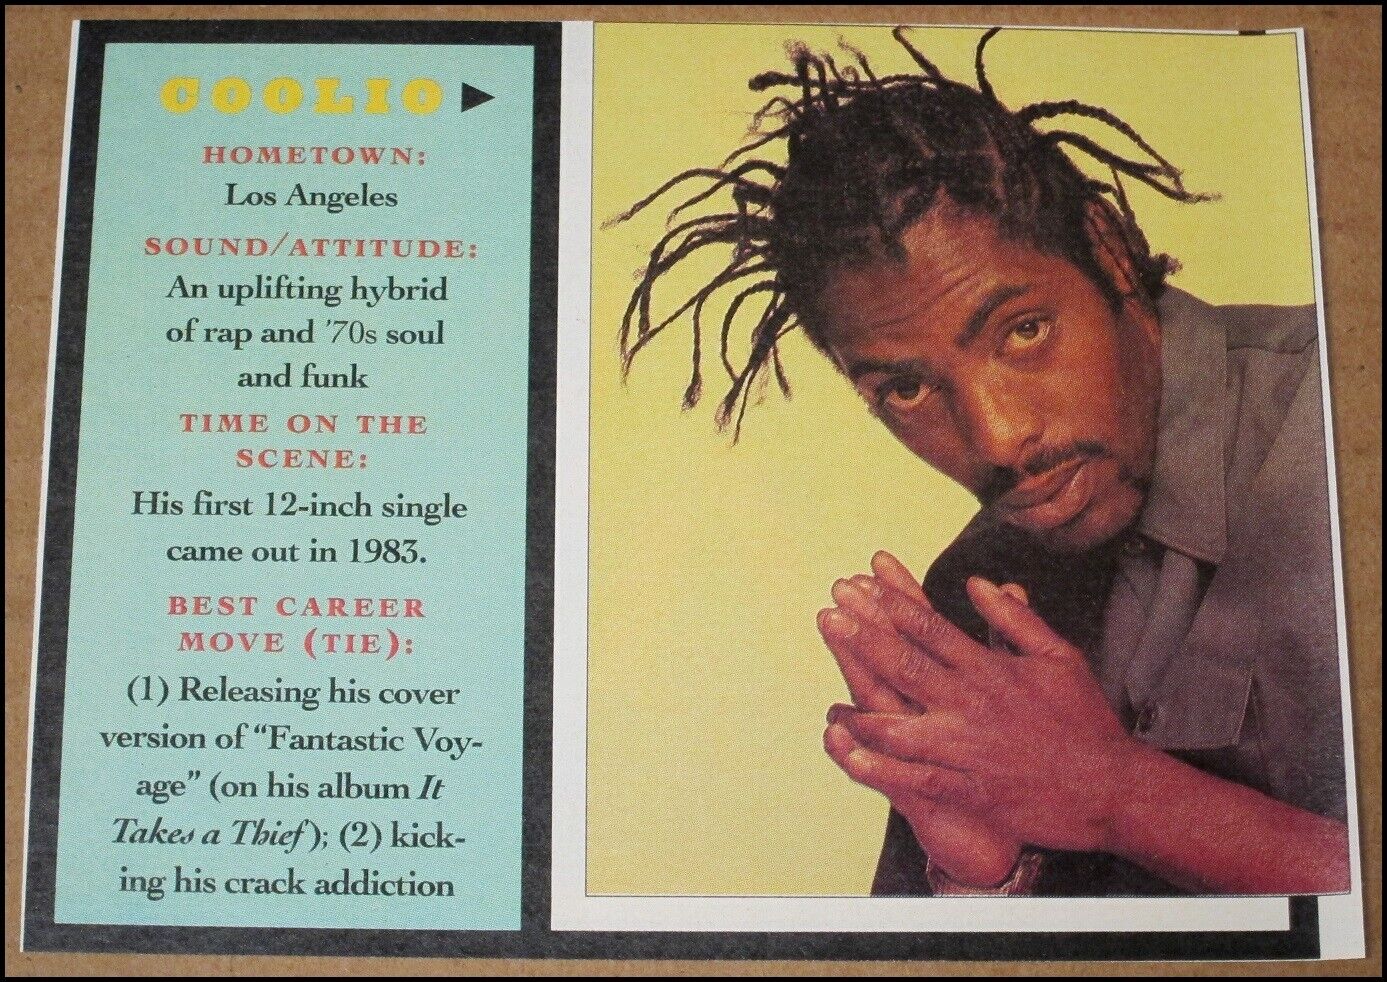 1994 Rapper Coolio RS Magazine Photo Clipping 5\